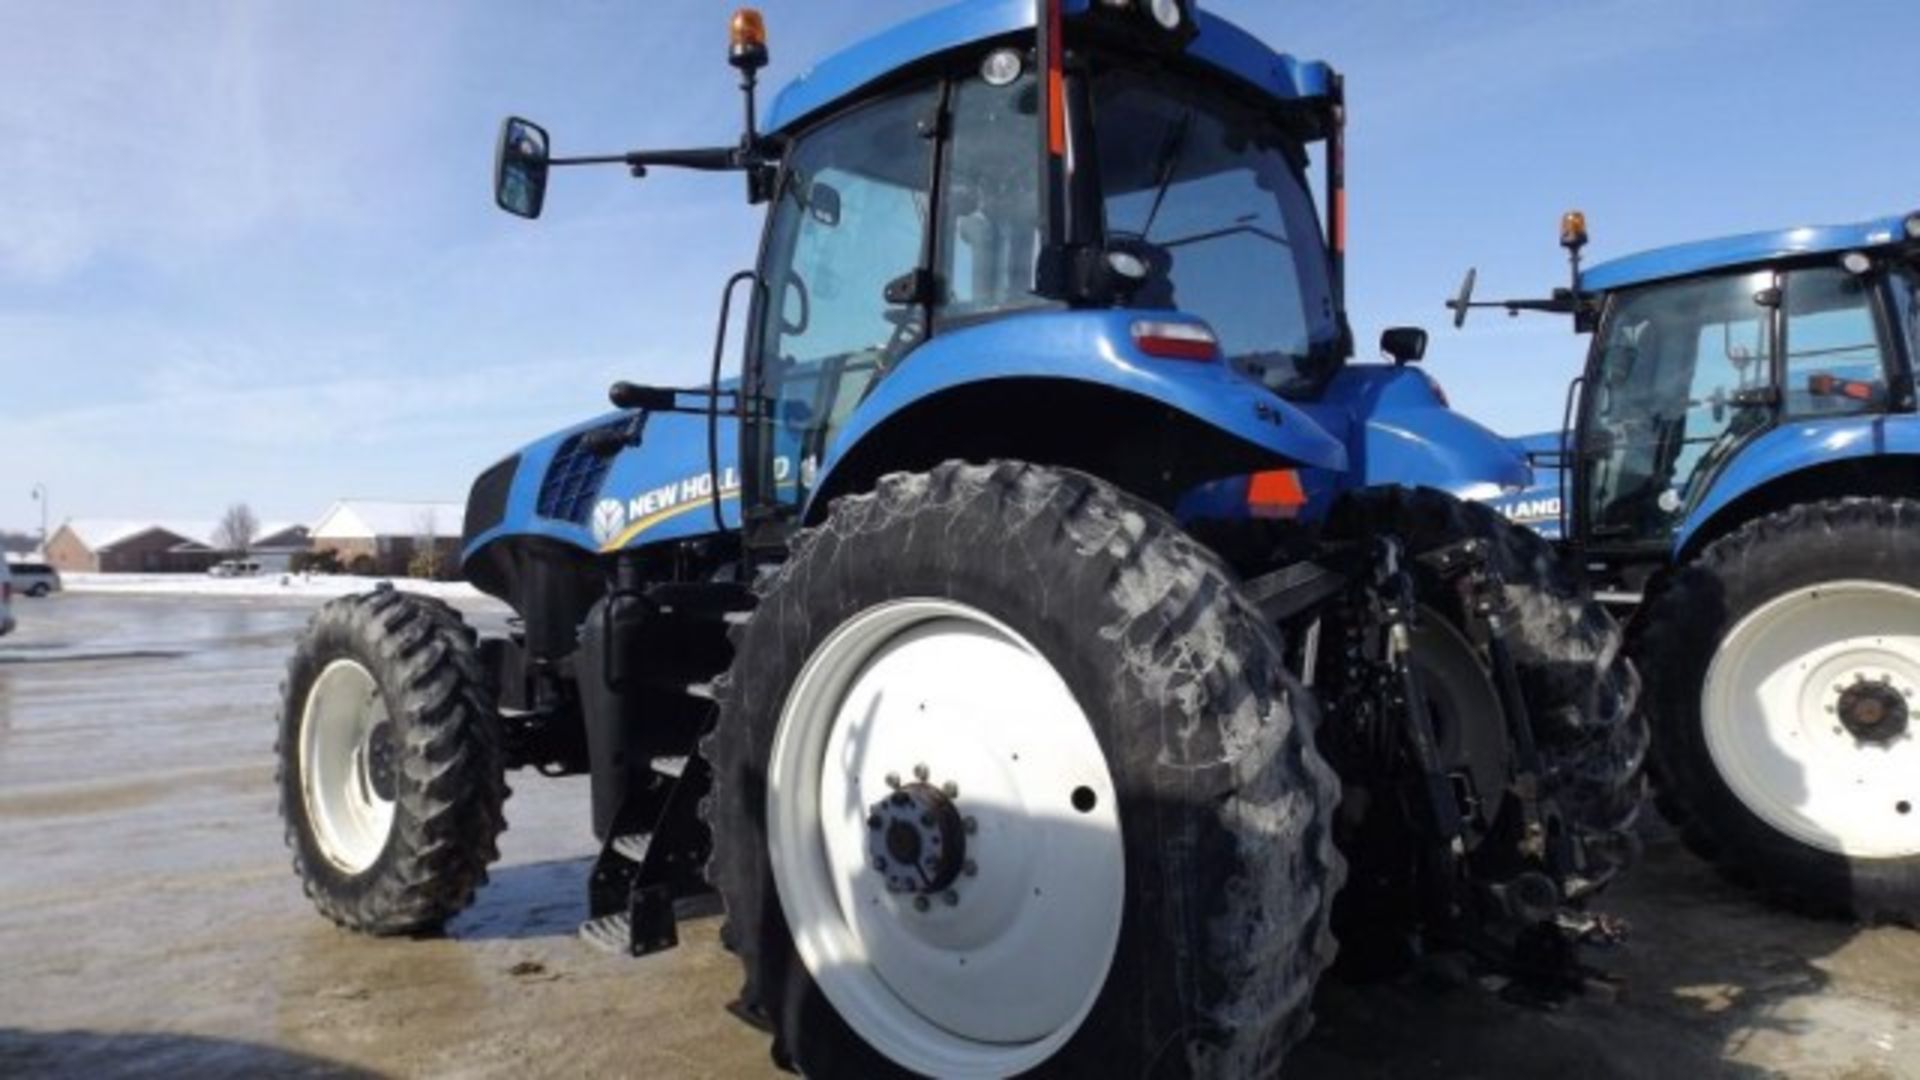 New Holland T8.275 Tractor '12, sn#ZCRC05266 4448 Hrs, MFWD, Deluxe Cab, Buddy Seat, 235 HP, 18/4 - Image 3 of 17